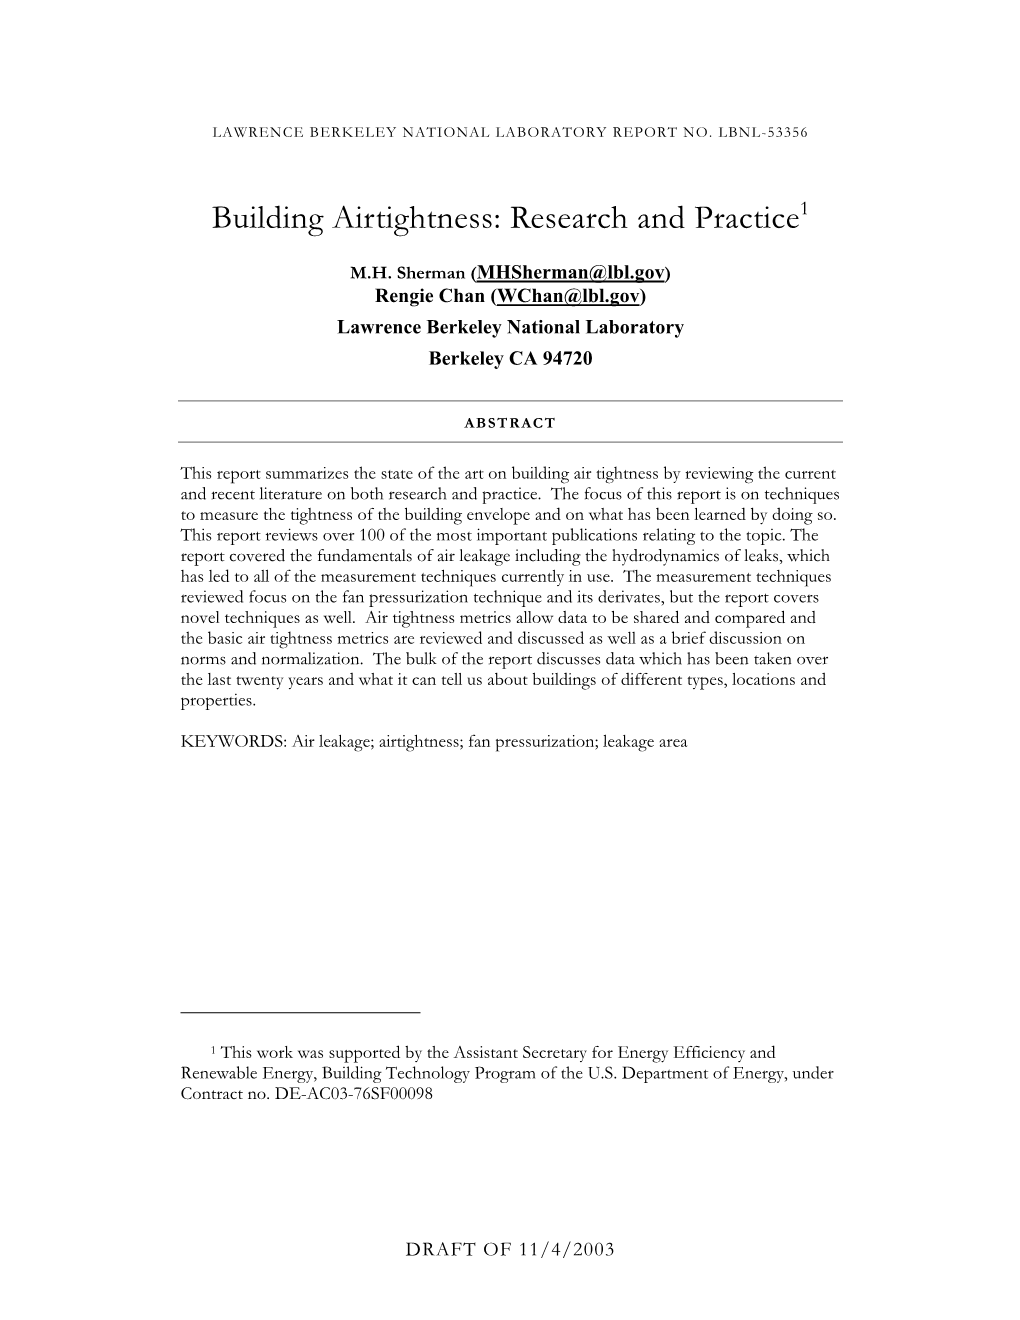 Building Airtightness: Research and Practice1